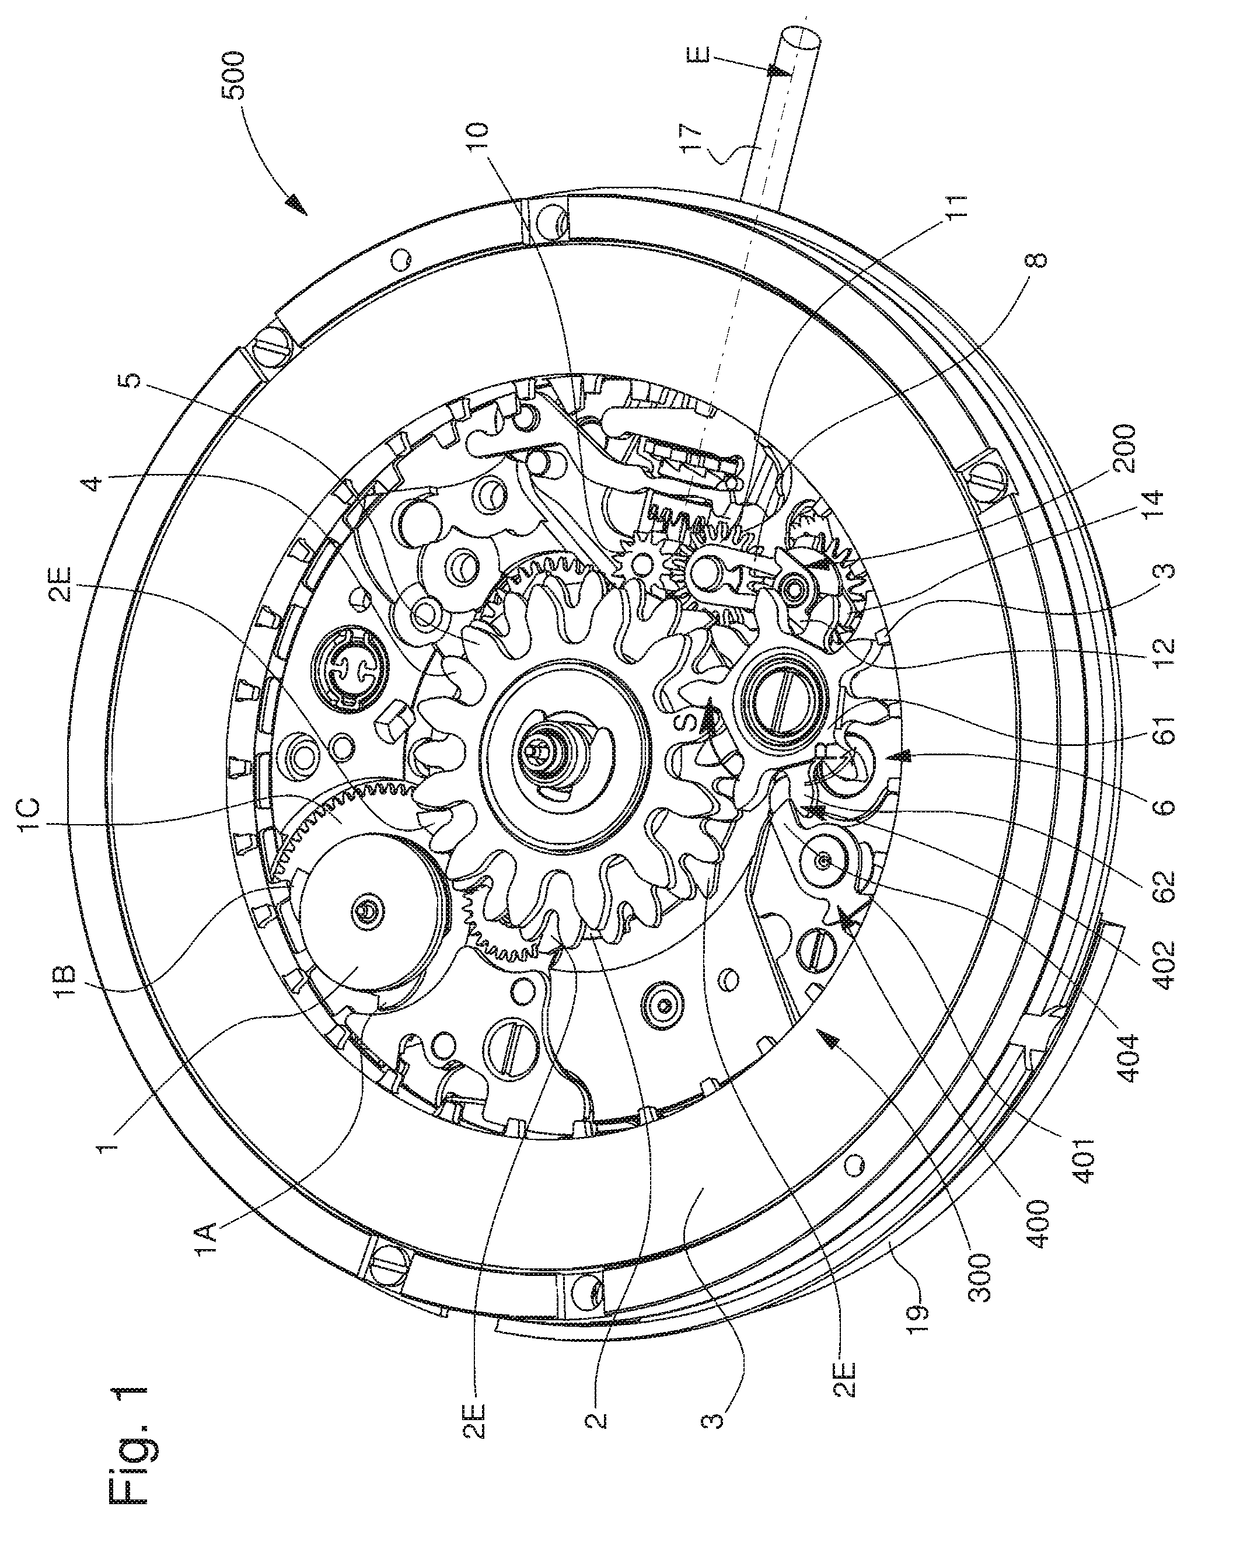 Timepiece display mechanism with a fast corrector